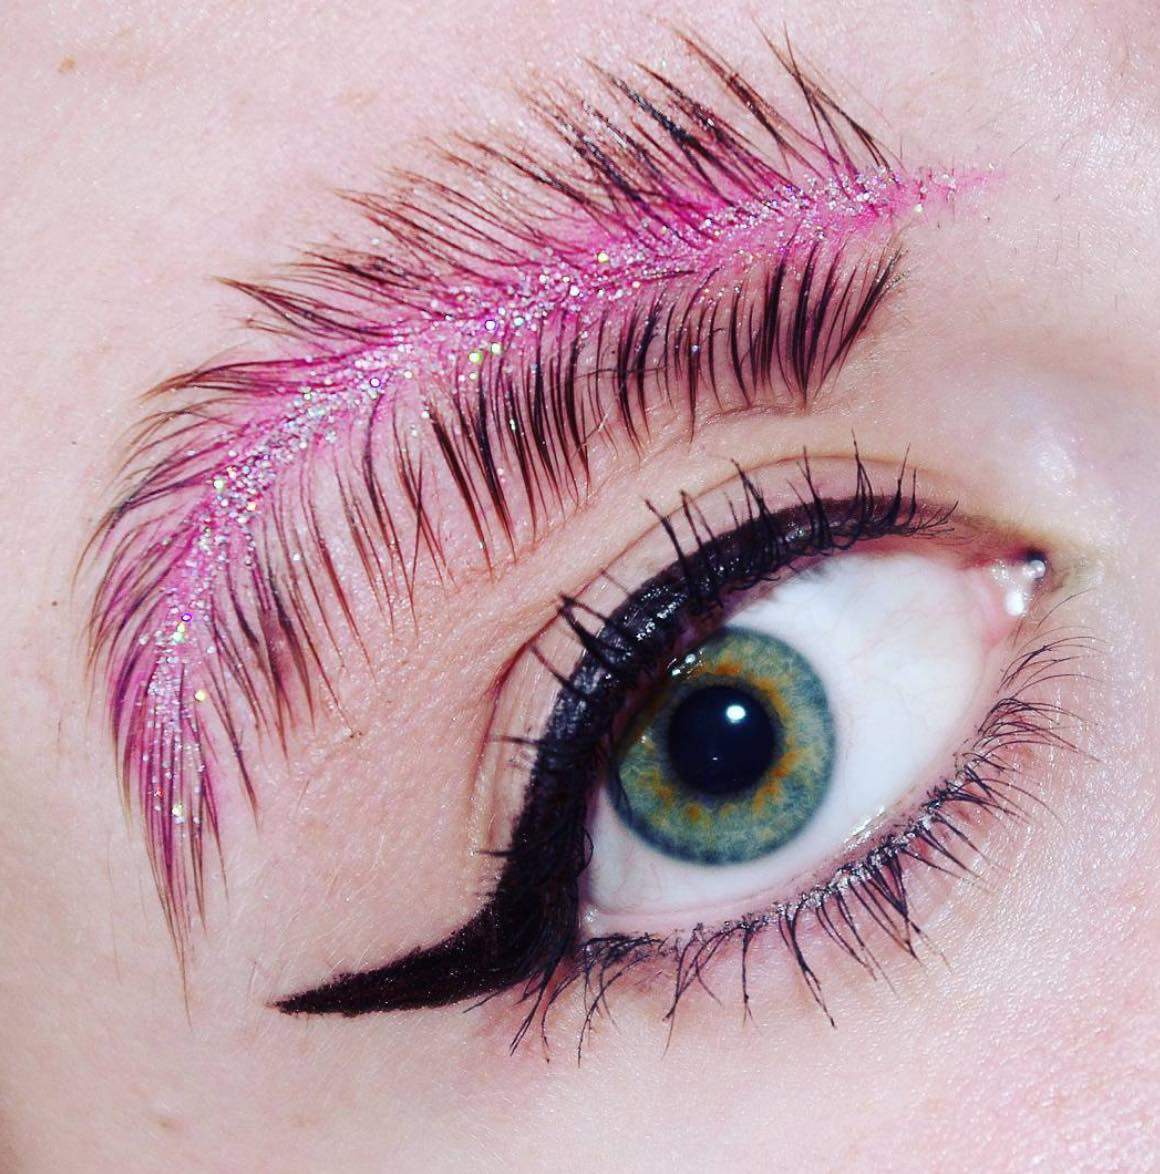 Feather eyebrows